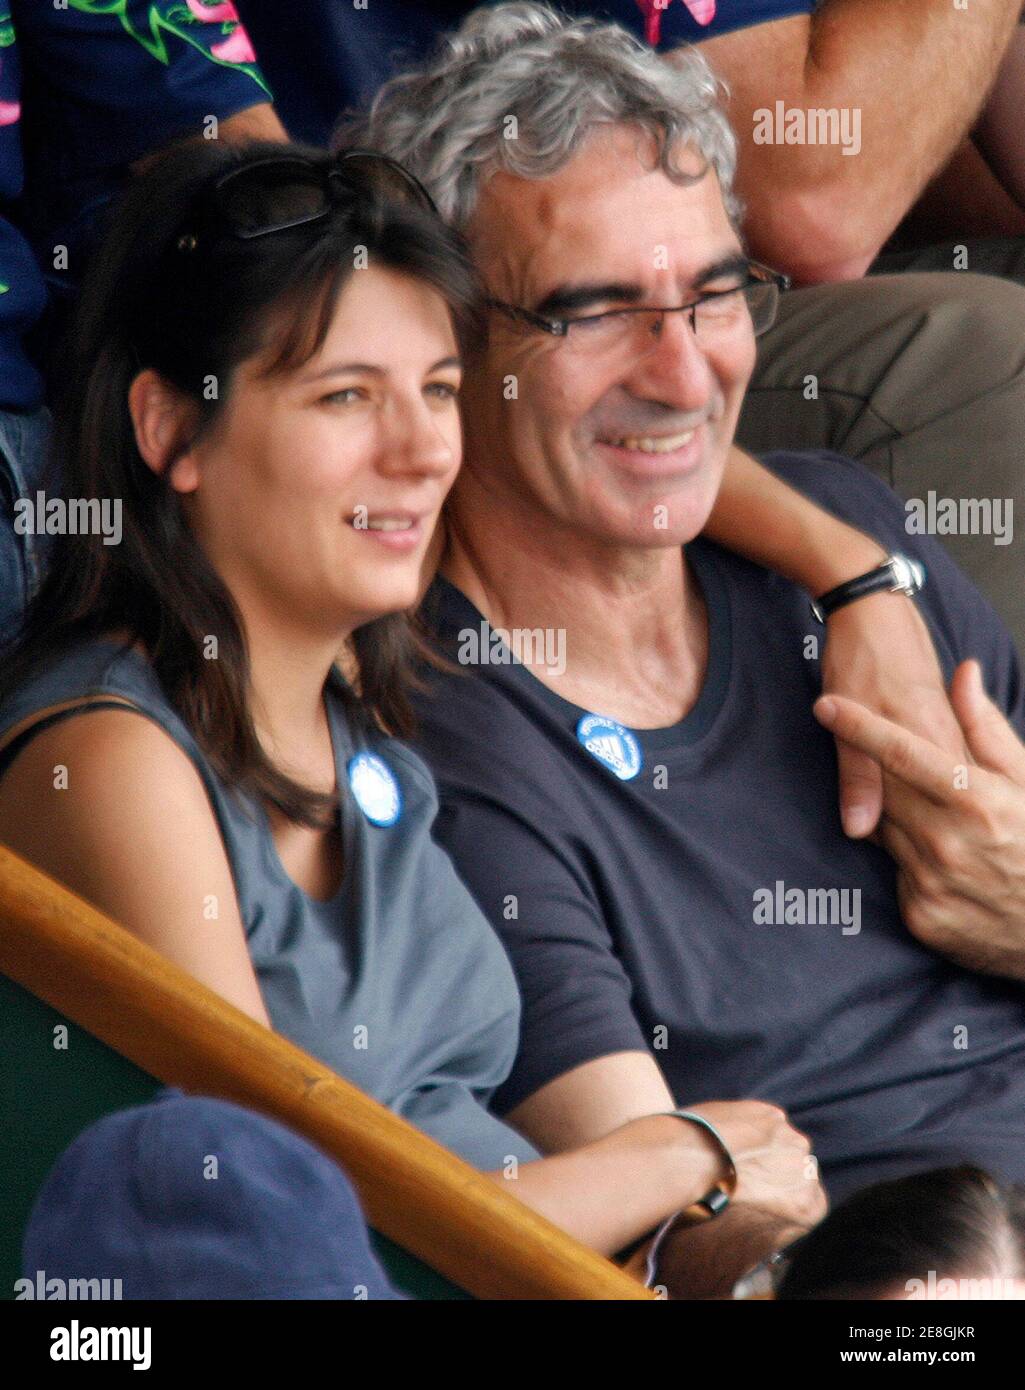 France S Soccer Coach Raymond Domenech R And His Friend Estelle Denis Watch The Men S Final Match Between Switzerland S Roger Federer And Spain S Rafael Nadal At The French Open Tennis Tournament At Roland